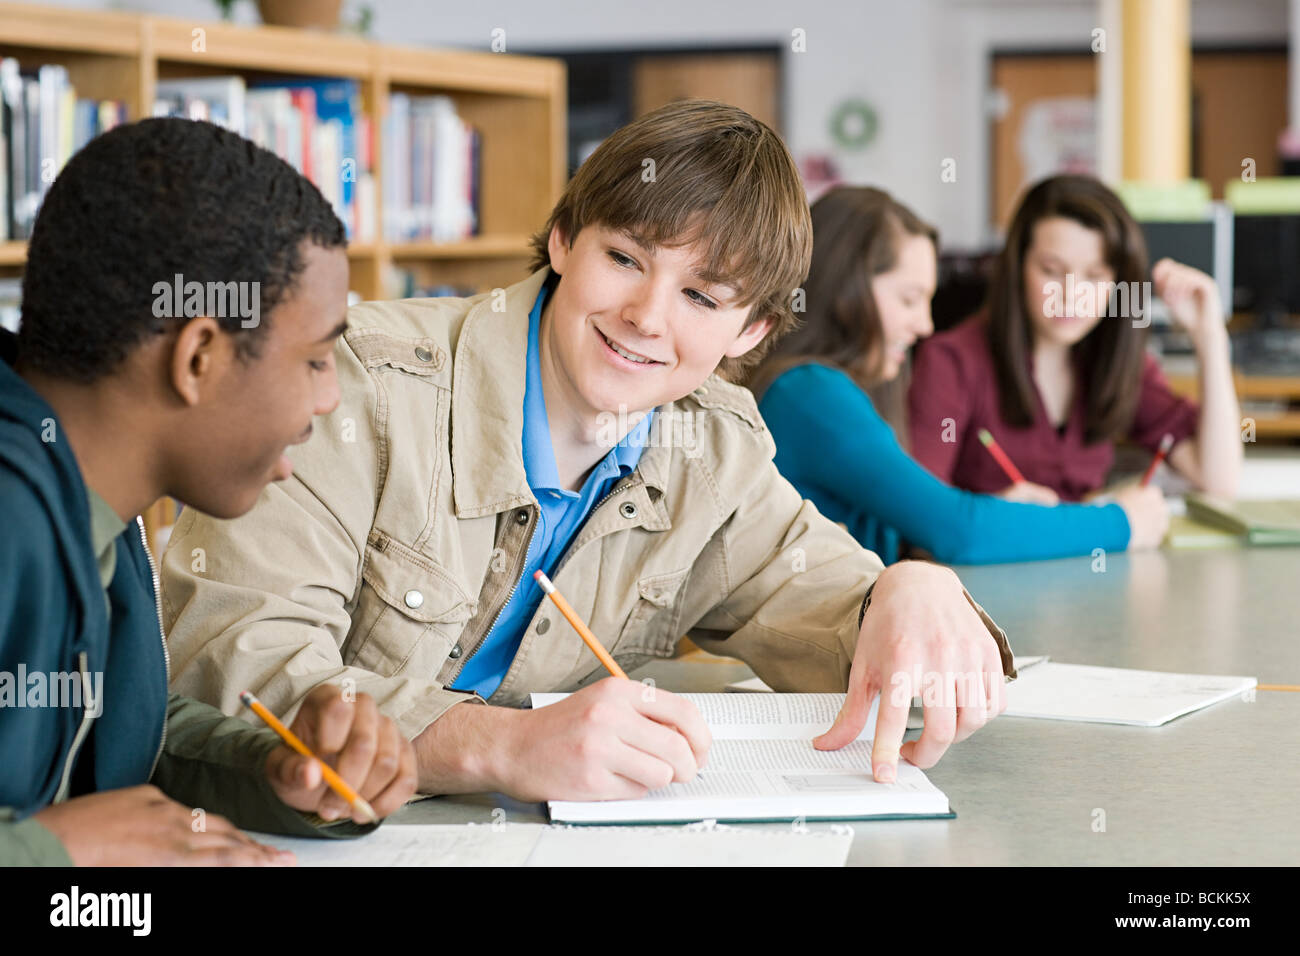 School students in library Stock Photo